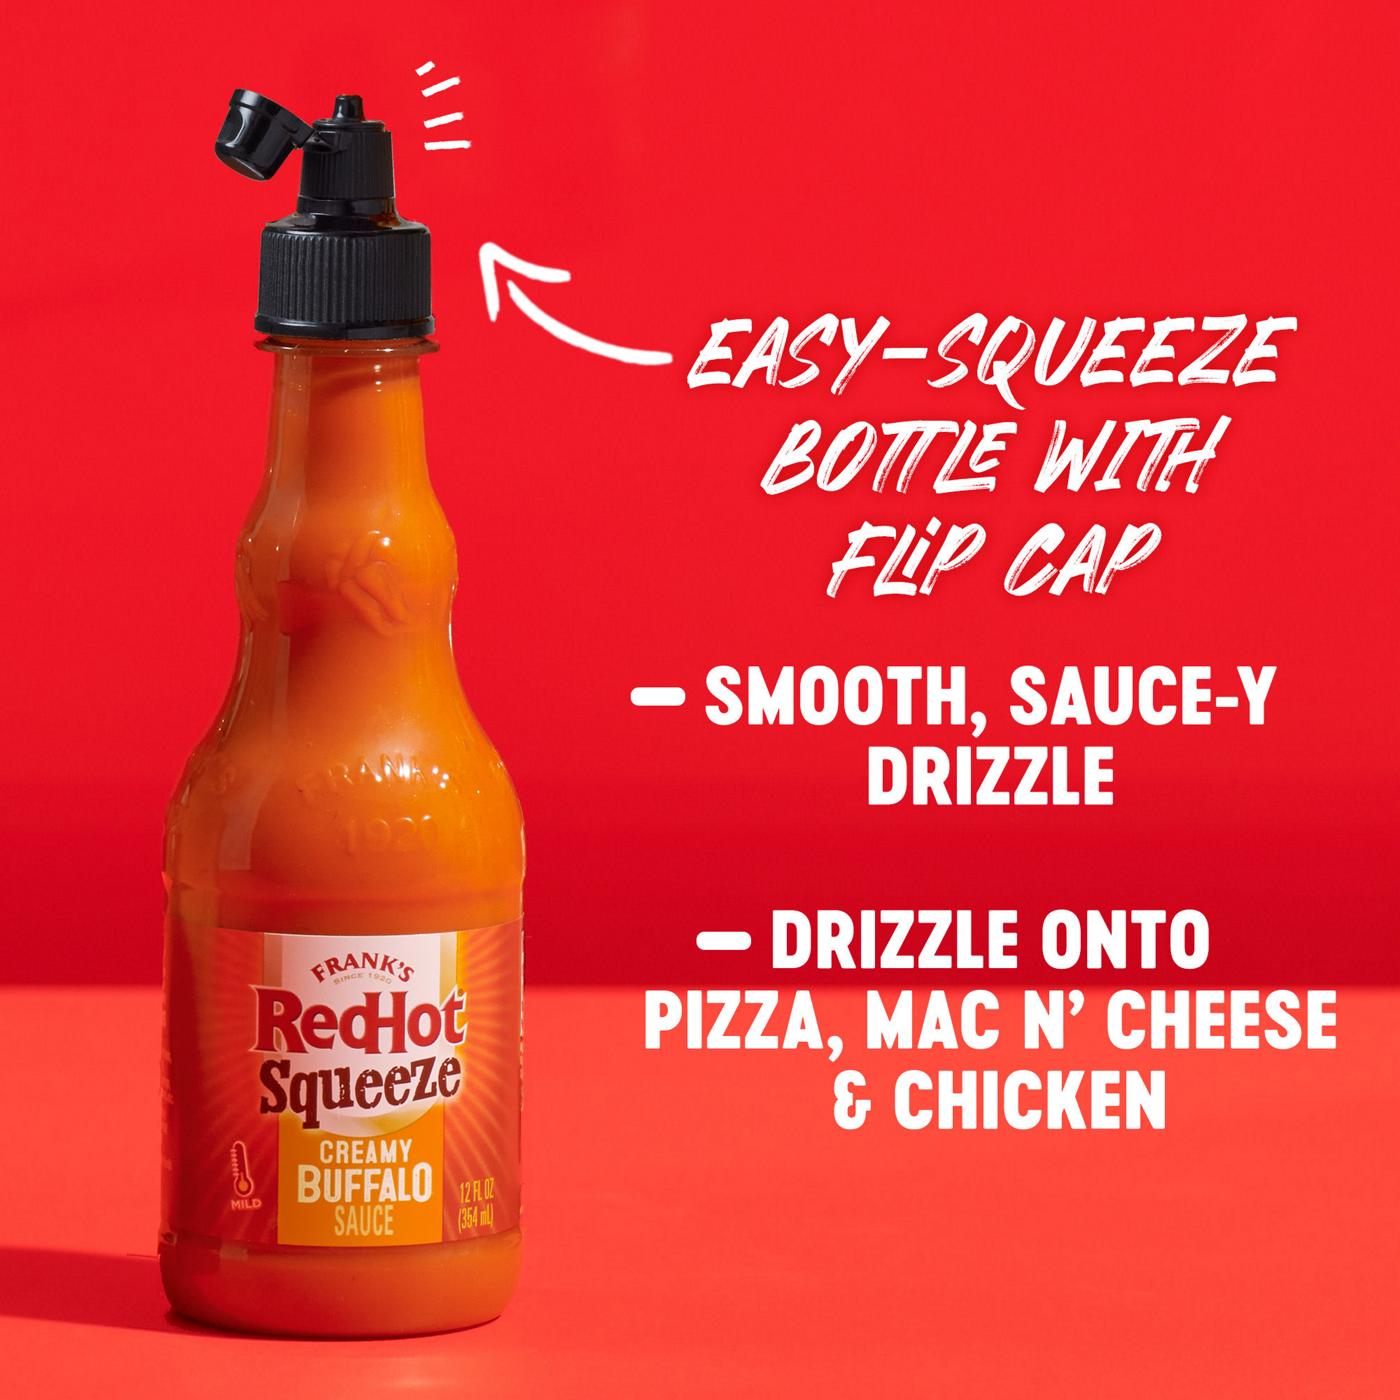 Frank's RedHot Squeeze Creamy Buffalo Sauce; image 5 of 5